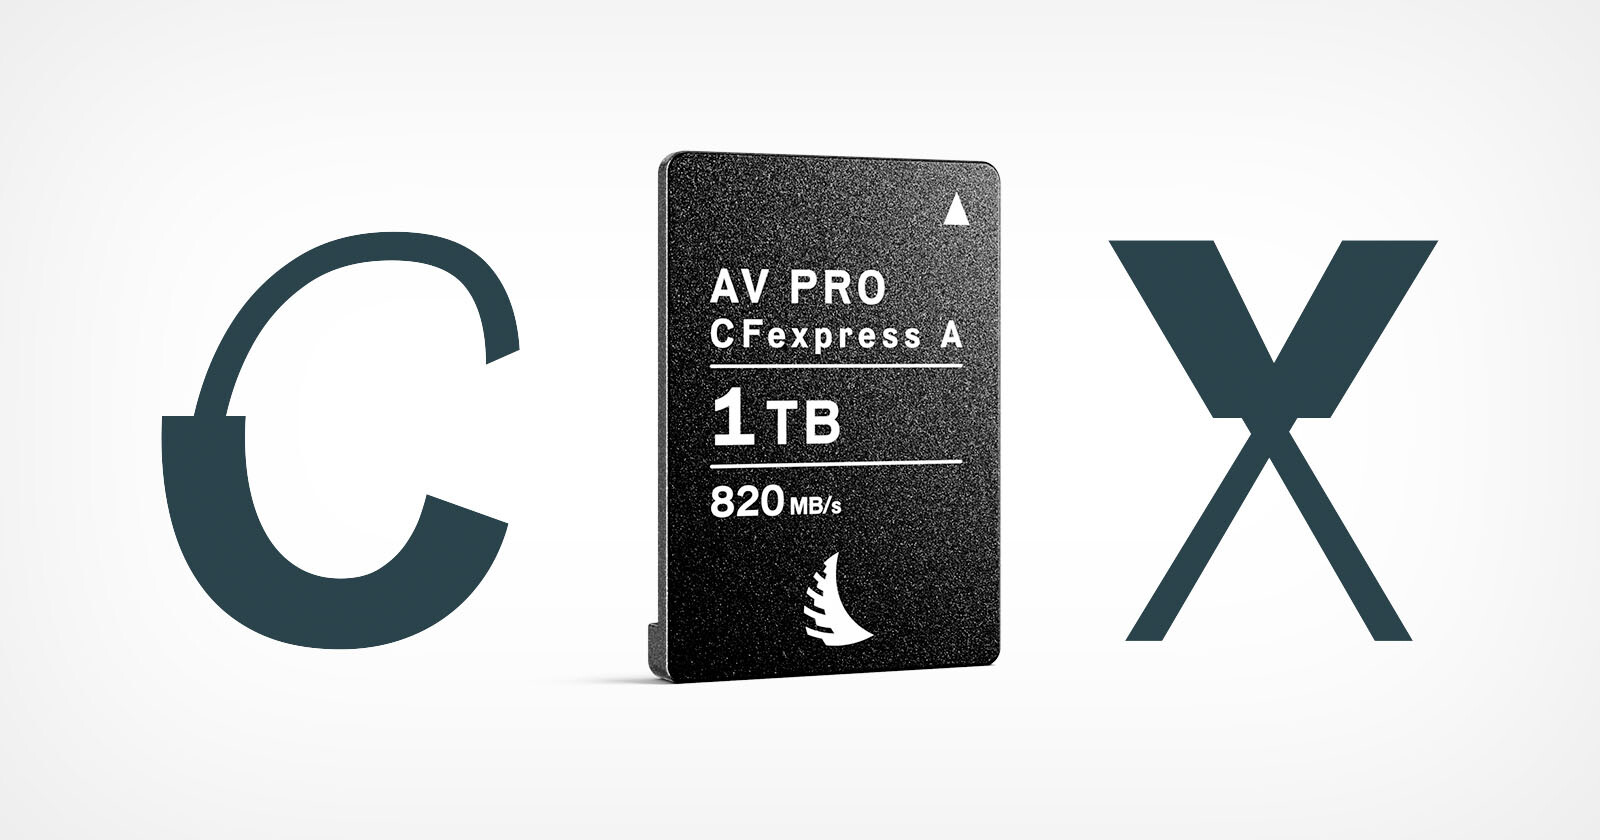 Angelbird Unveils a Massive 1TB CFexpress Card for Sony Cameras